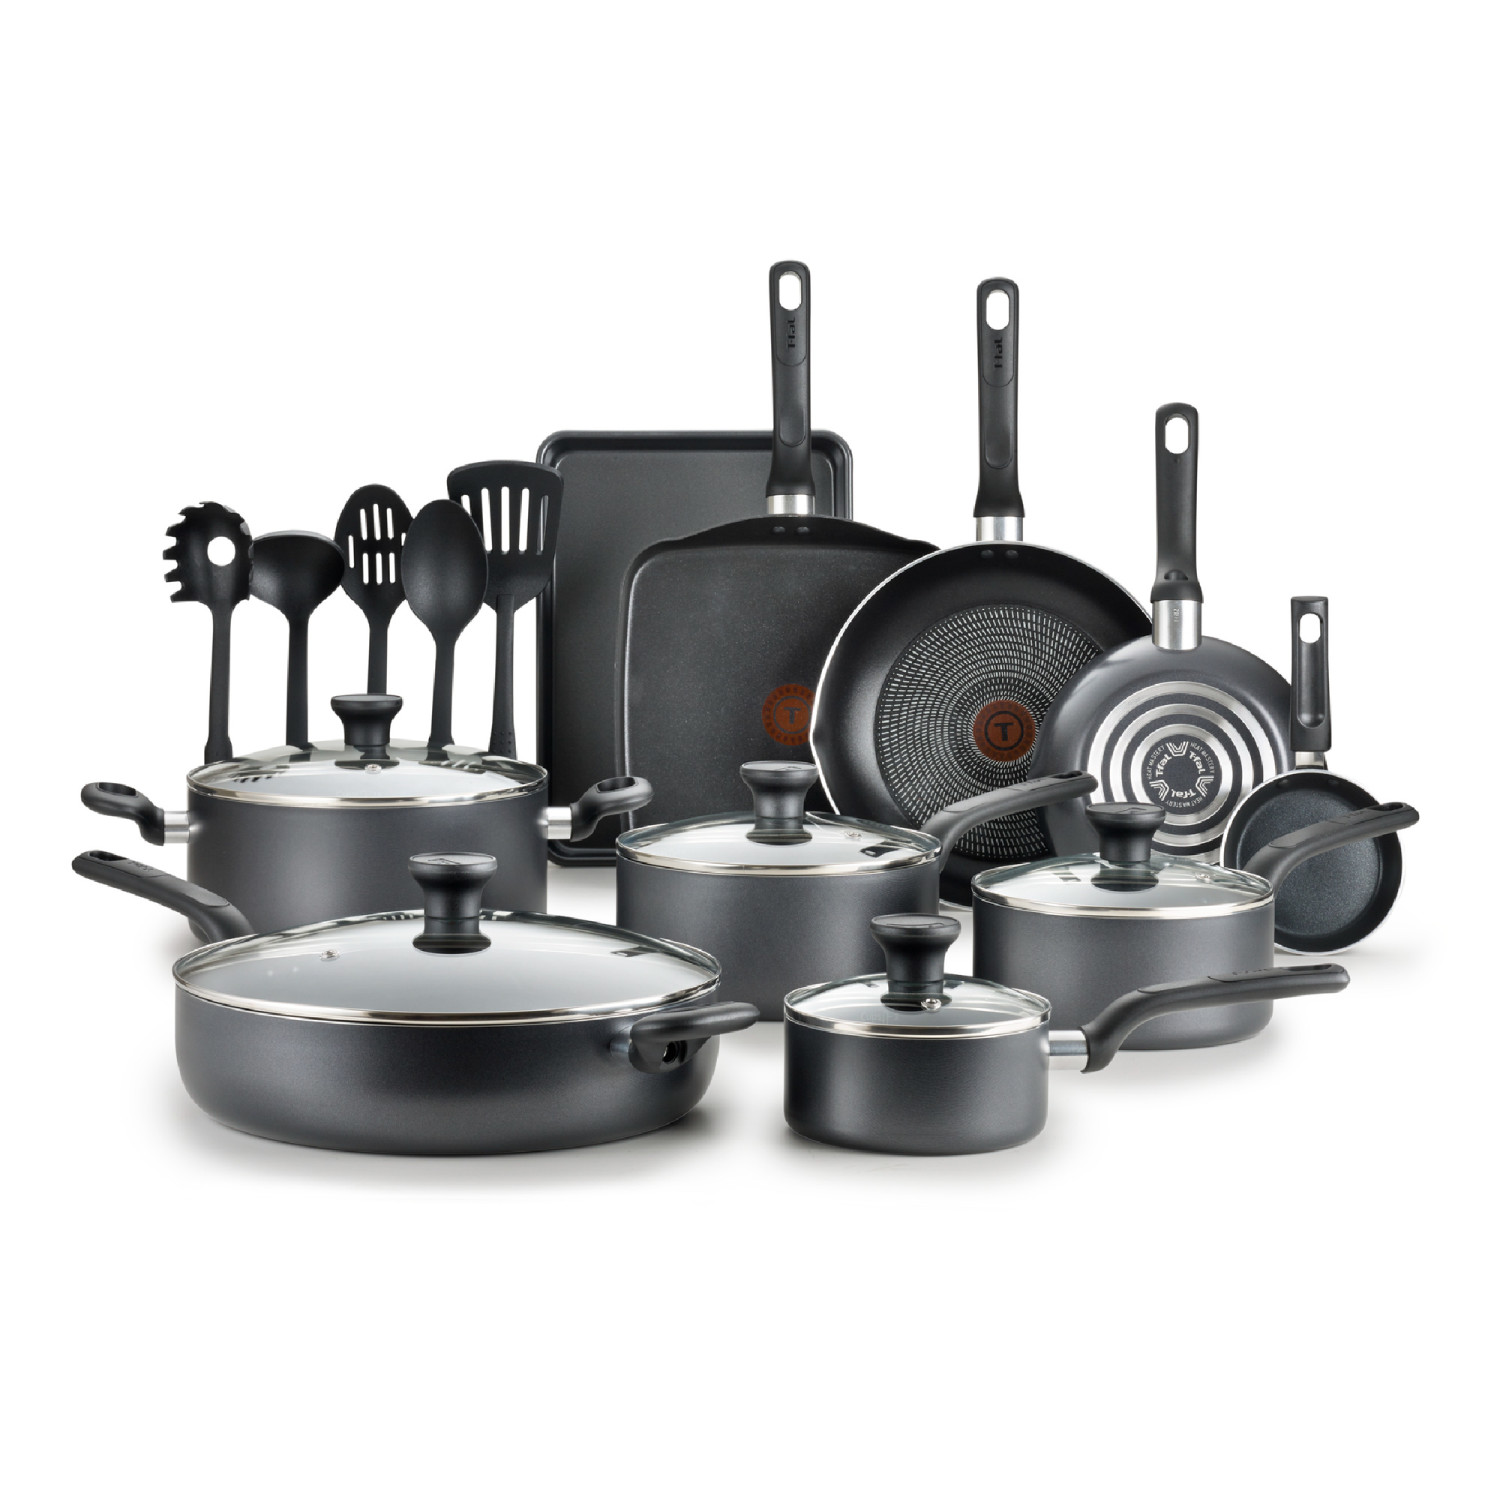 T-fal Easy Care, 20 Piece Non-Stick Pots and Pans Cookware Set, Grey - image 1 of 11